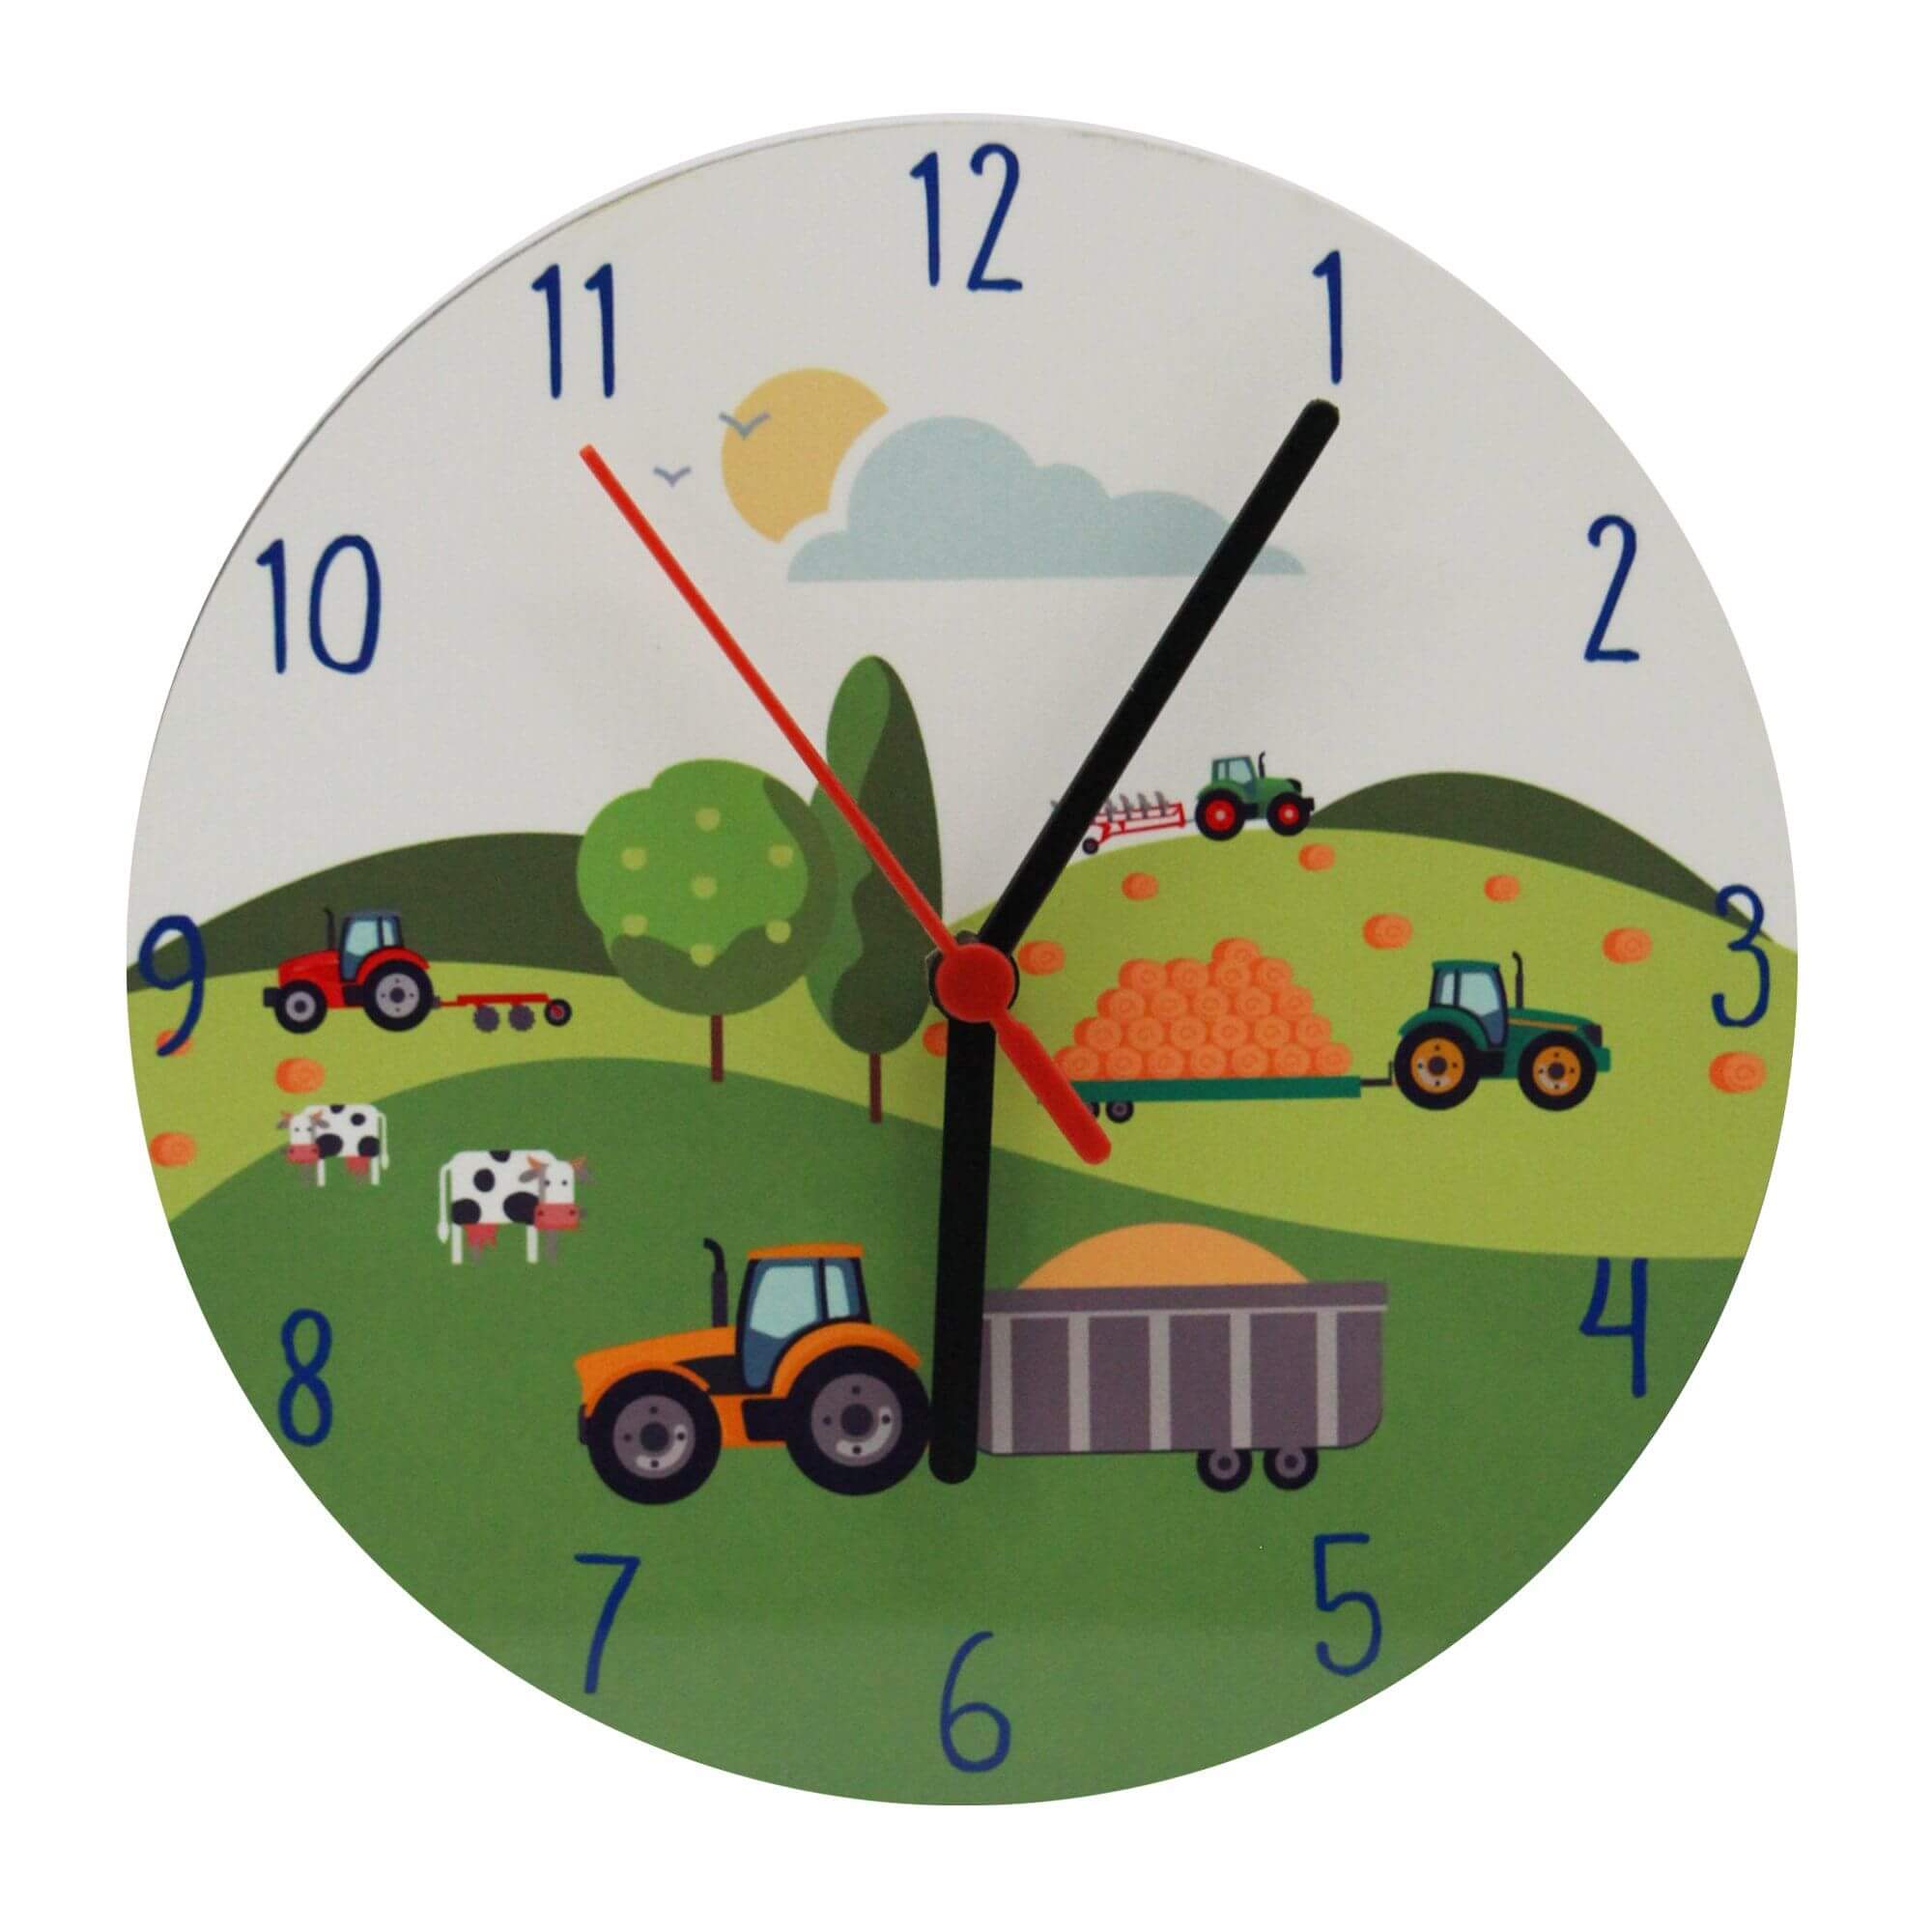 Farm themed childrens clock for a kids bedroom or nursery with tractors, cows, bales, frees, hills and clouds  on the clock face. Black hands with second hand. From Mustard and Gray